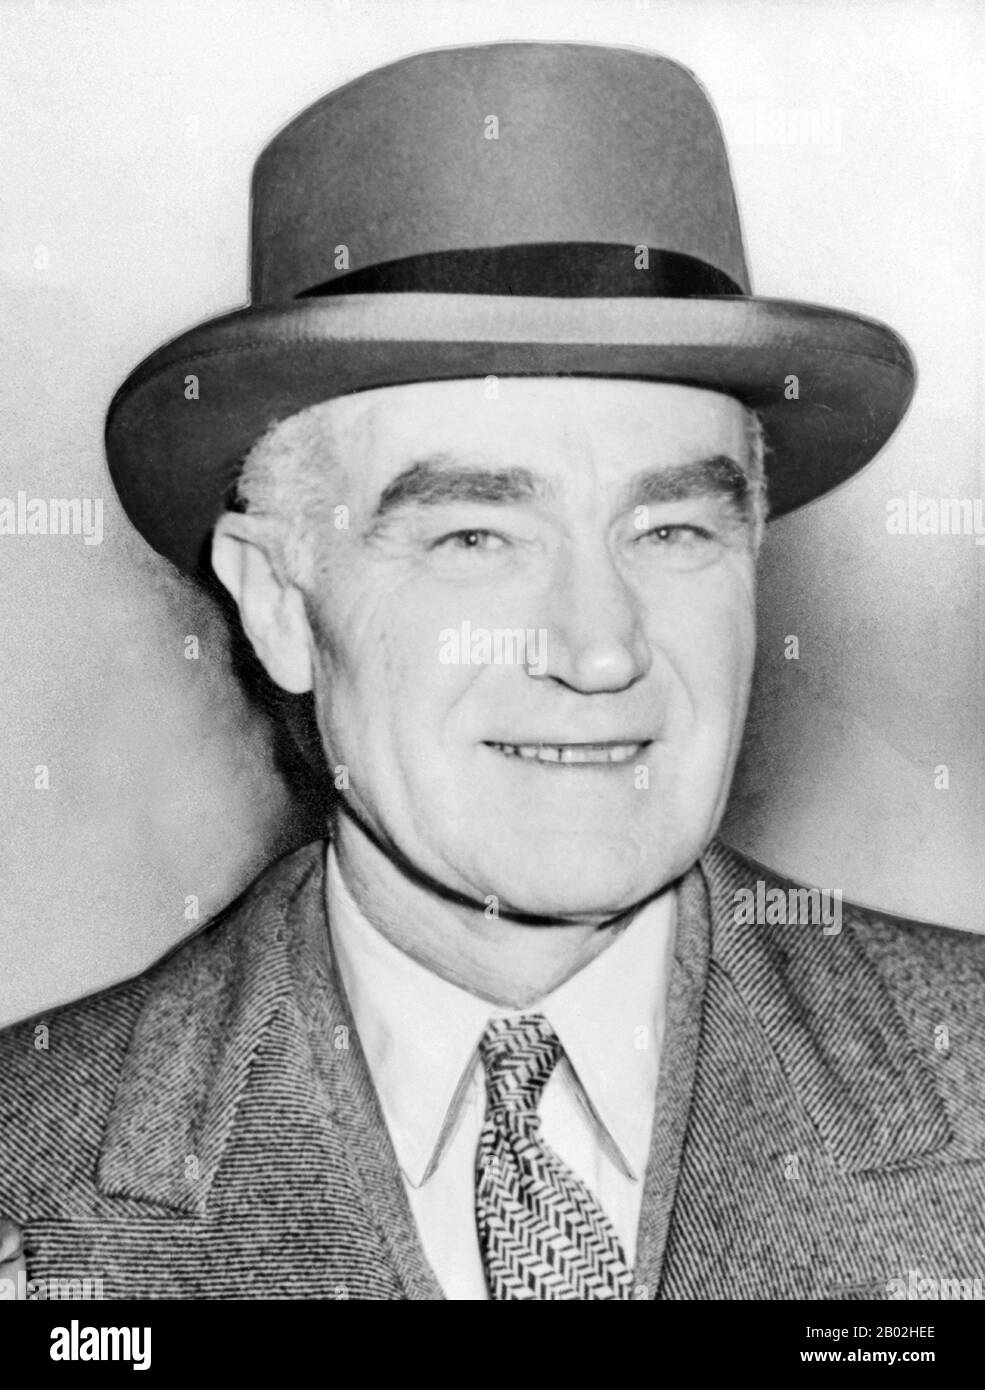 Henry Robinson Luce (April 3, 1898 – February 28, 1967), an American magazine magnate, was called 'the most influential private citizen in the America of his day'. He launched and closely supervised a stable of magazines that transformed journalism and the reading habits of upscale Americans.  Time summarized and interpreted the week's news; Life was a picture magazine of politics, culture, and society that dominated American visual perceptions in the era before television; Fortune explored in depth the economy and the world of business, introducing to executives avant-garde ideas such as Keyn Stock Photo